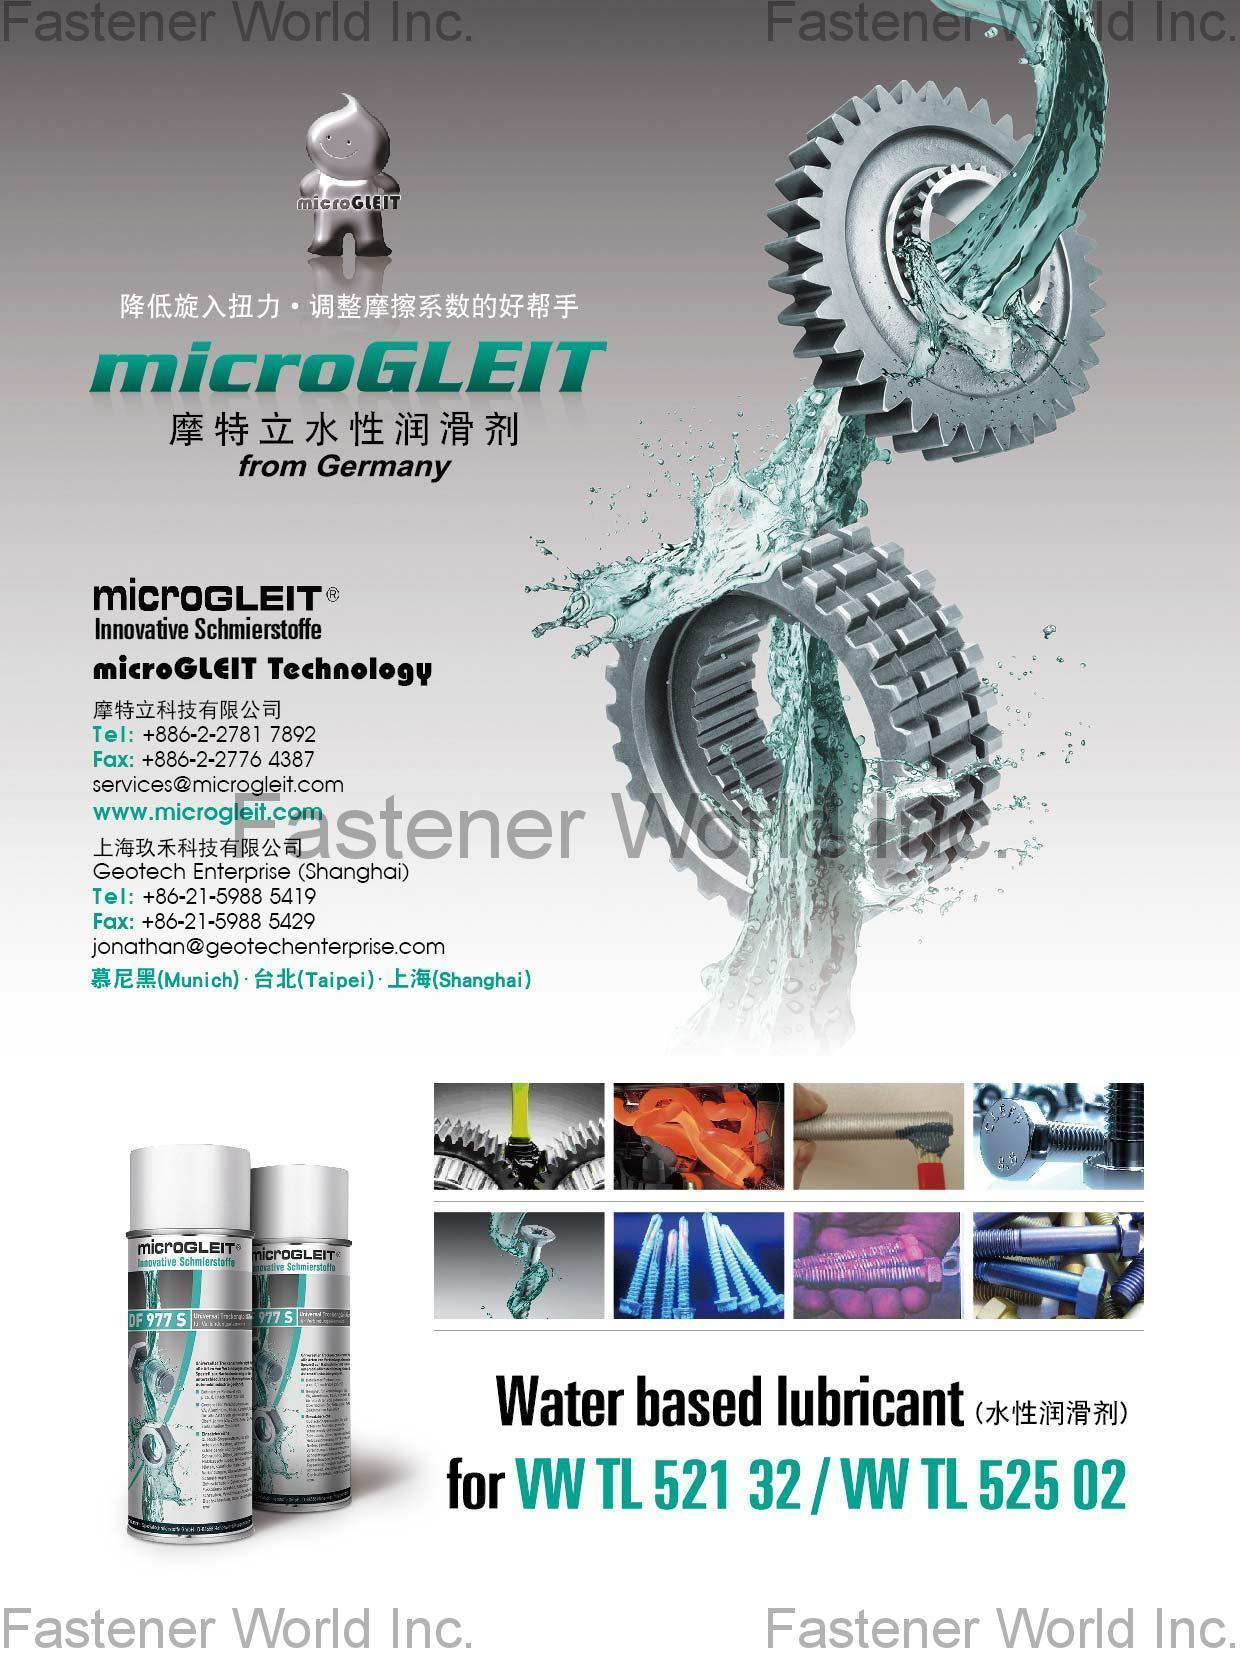 microGLEIT Technology Company  , MicroGleit Water Based Lubricant, Aluminum Lubricant, Alkaline Dry Film Lubricant, Acidic Dry Film Lubricant, PTFE Lubricant, Rescue Lubricant at Assembly, Coefficient of Friction, MoS2, Aluminum bolt, TAIWAN , Lubricant